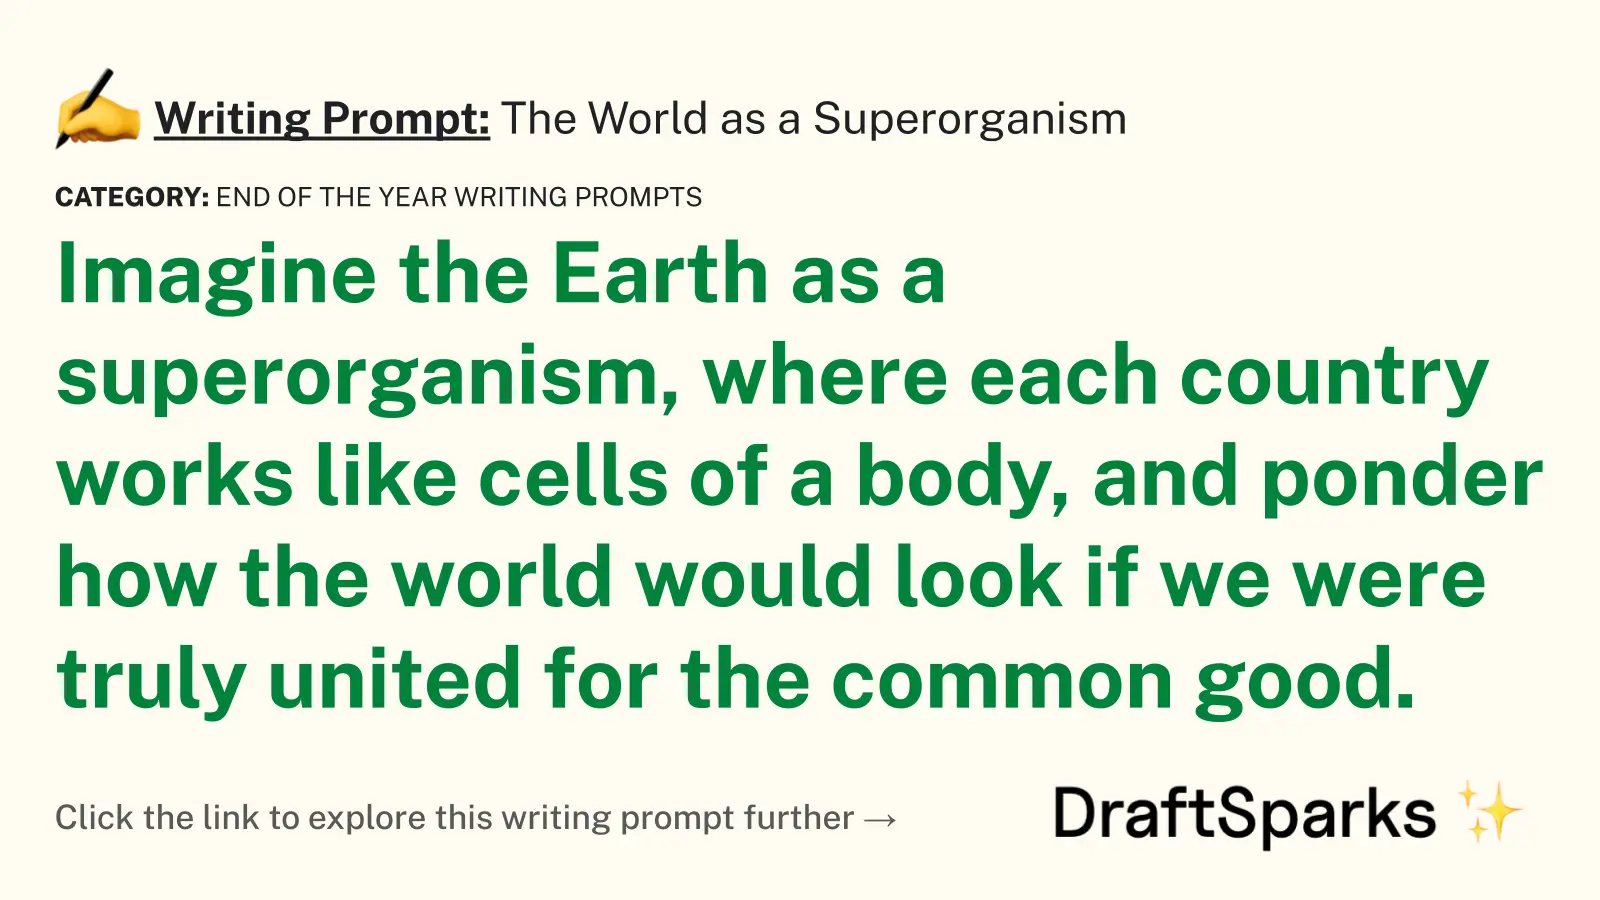 The World as a Superorganism